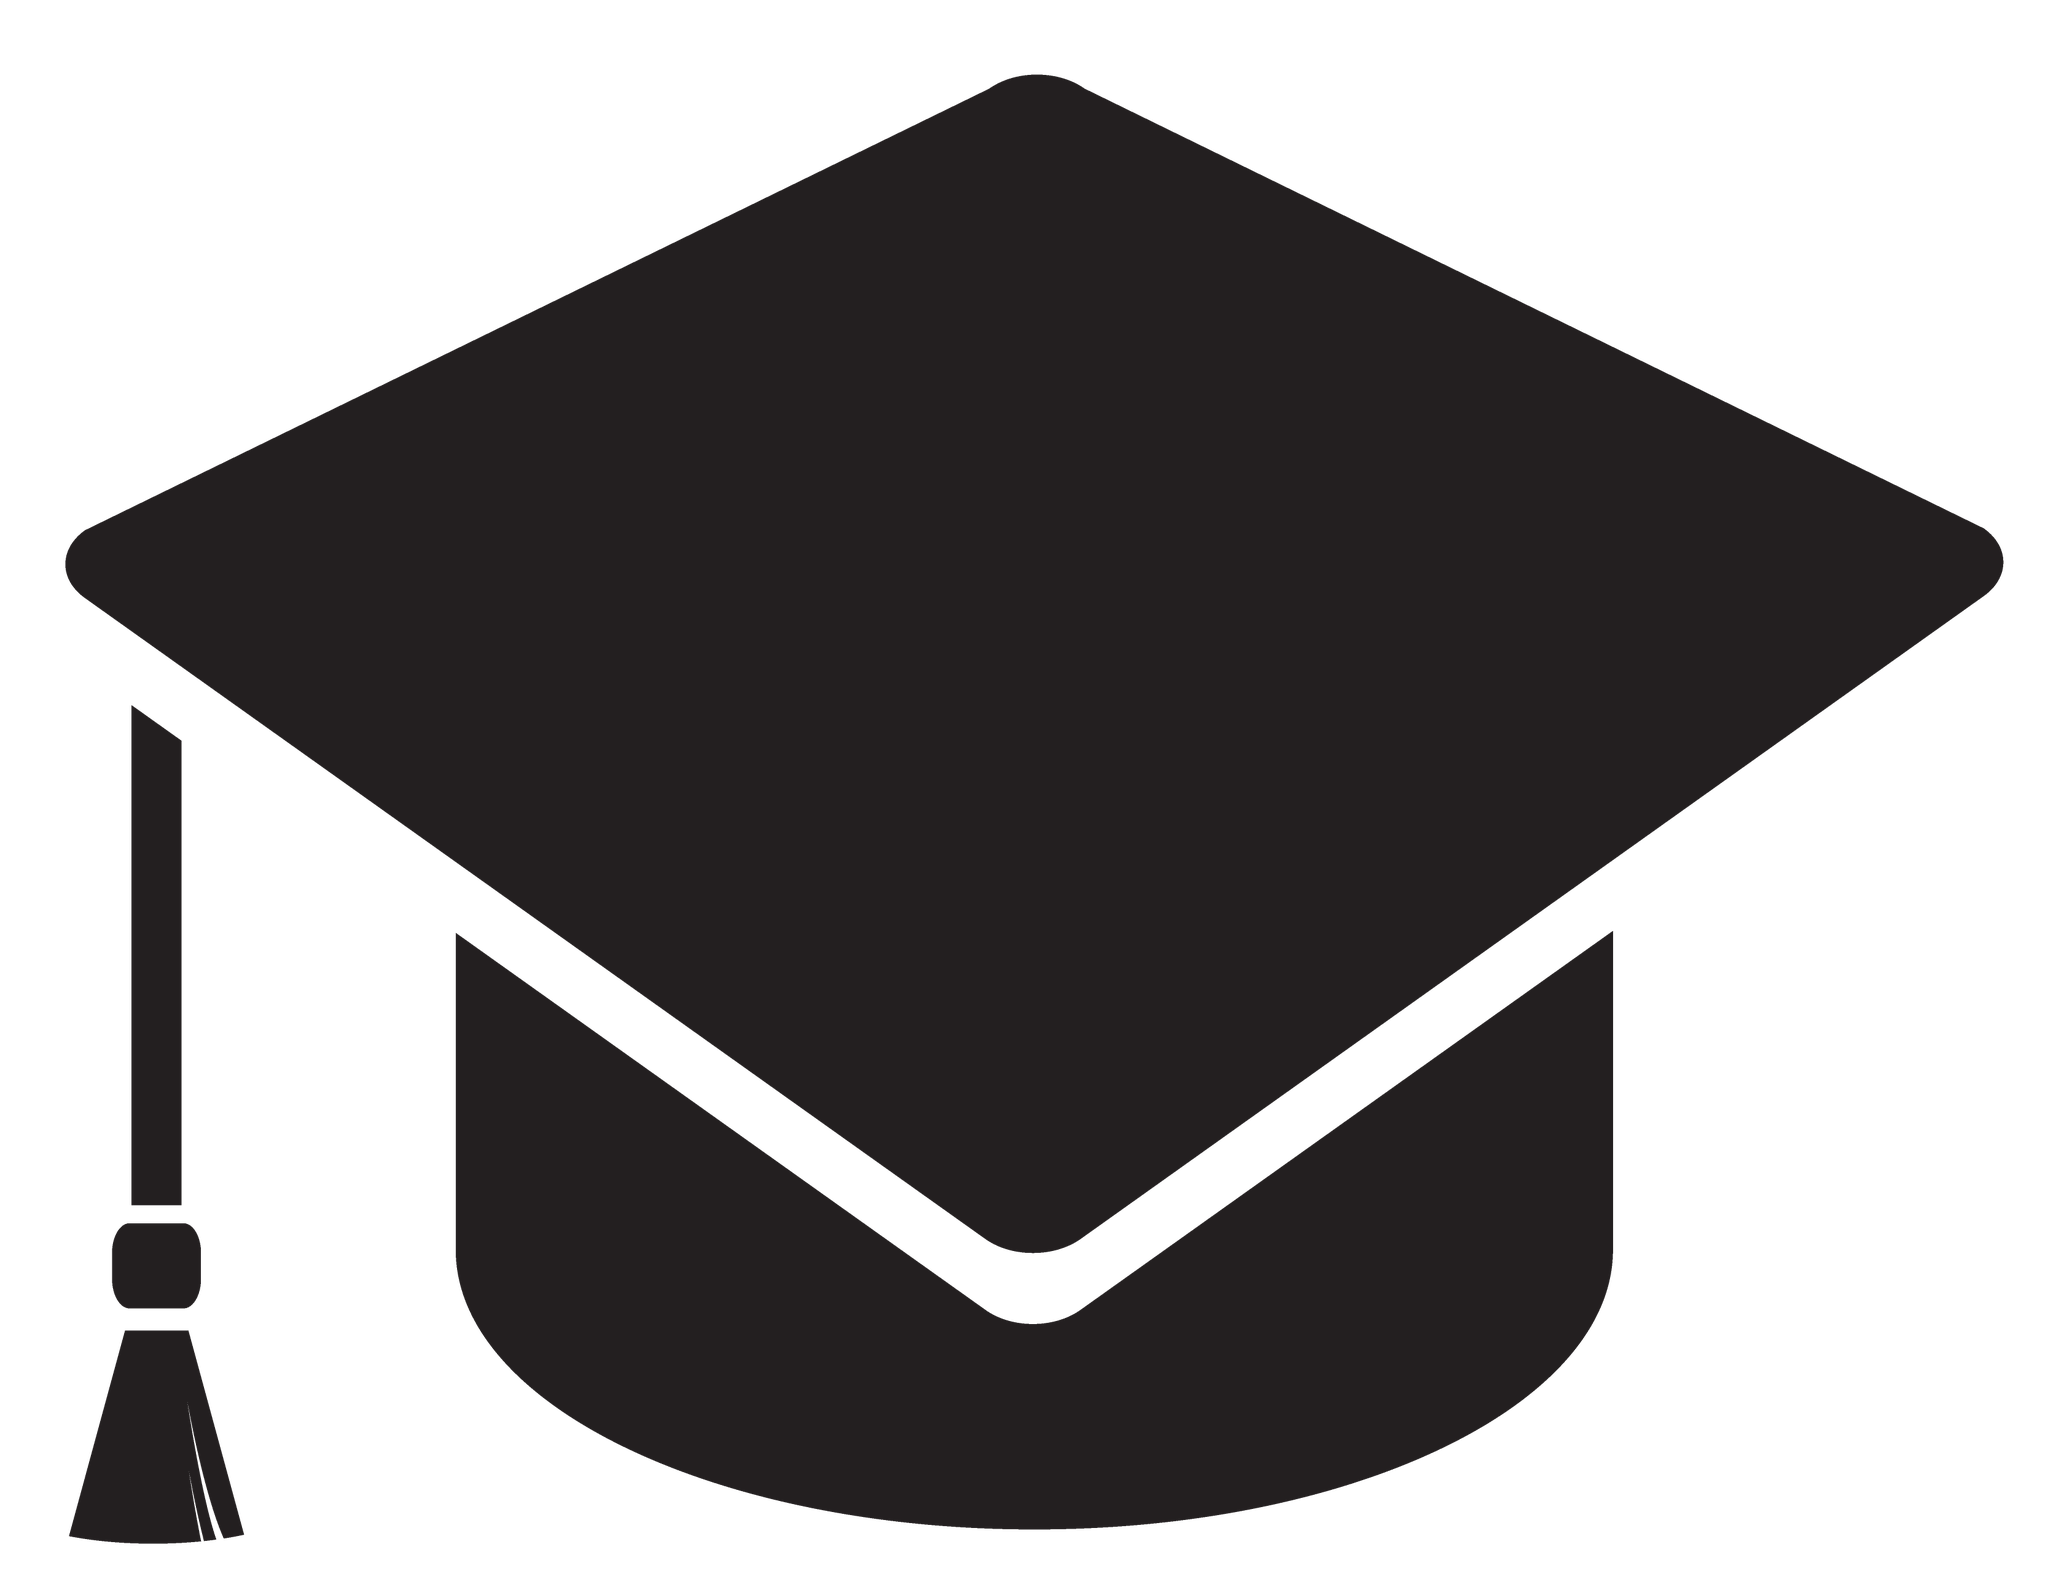 An icon of a graduation cap representing the student experience. Links to a description of the student experience driver.